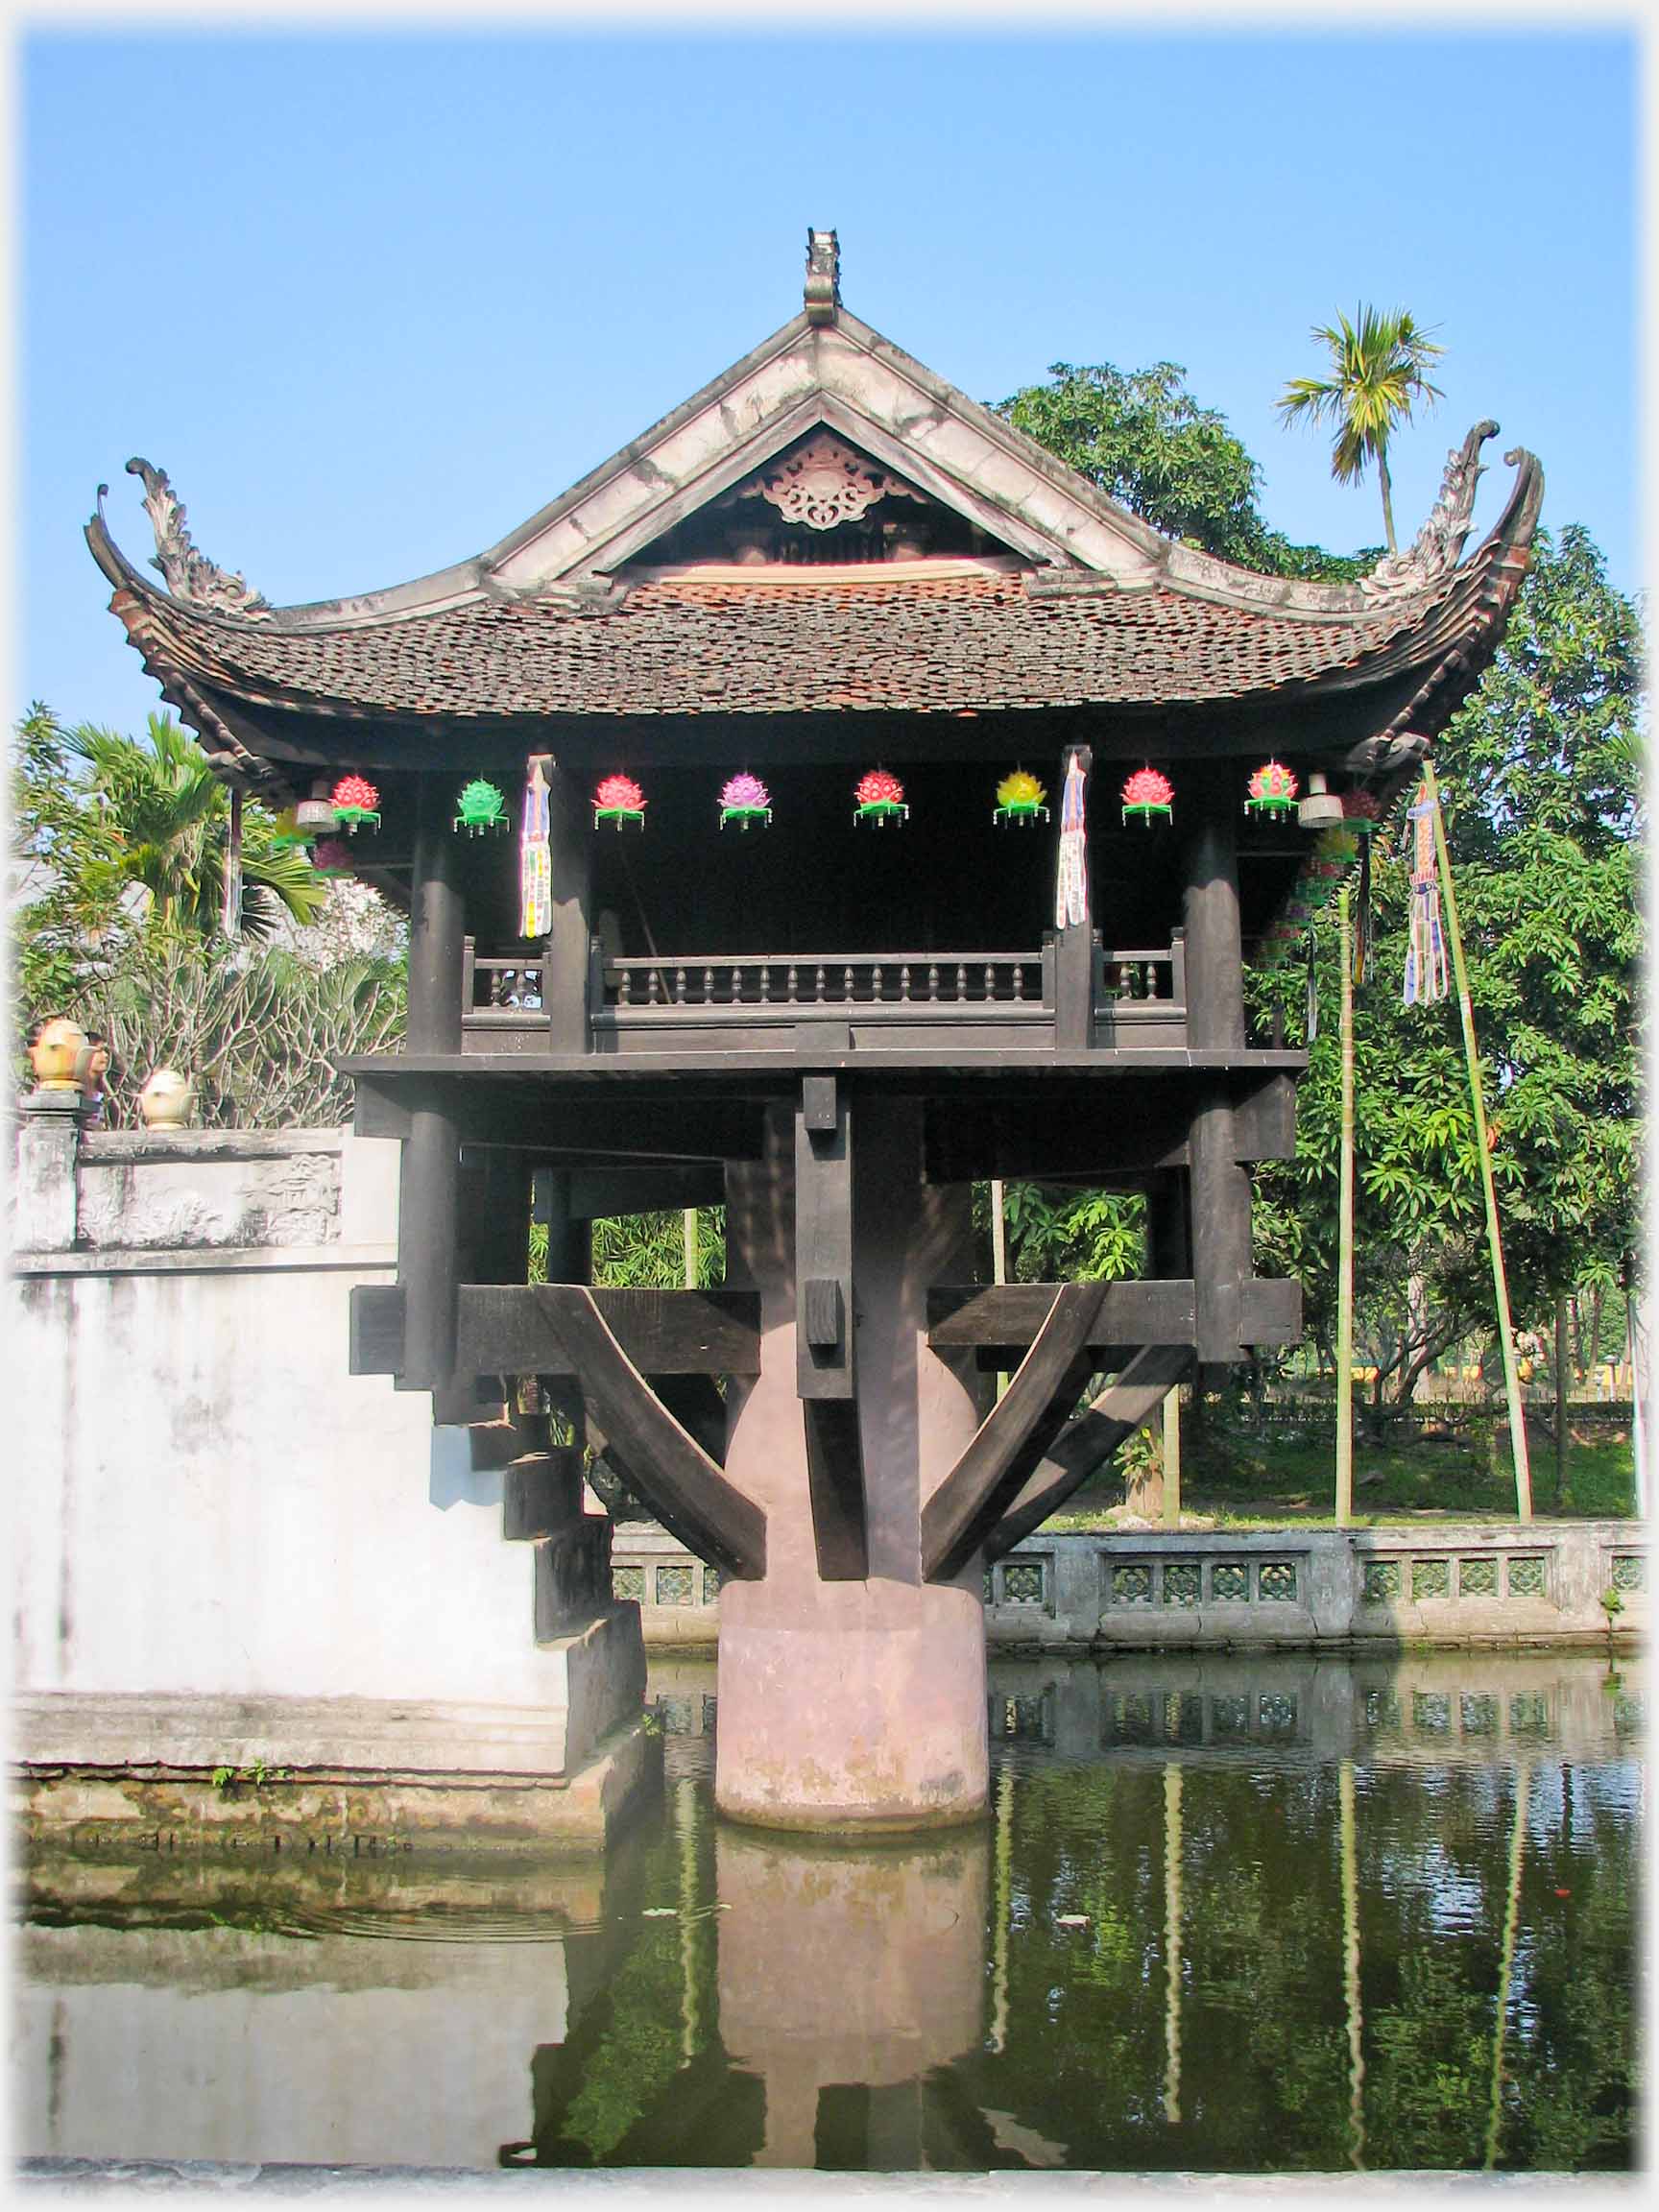 View of side of pagoda.